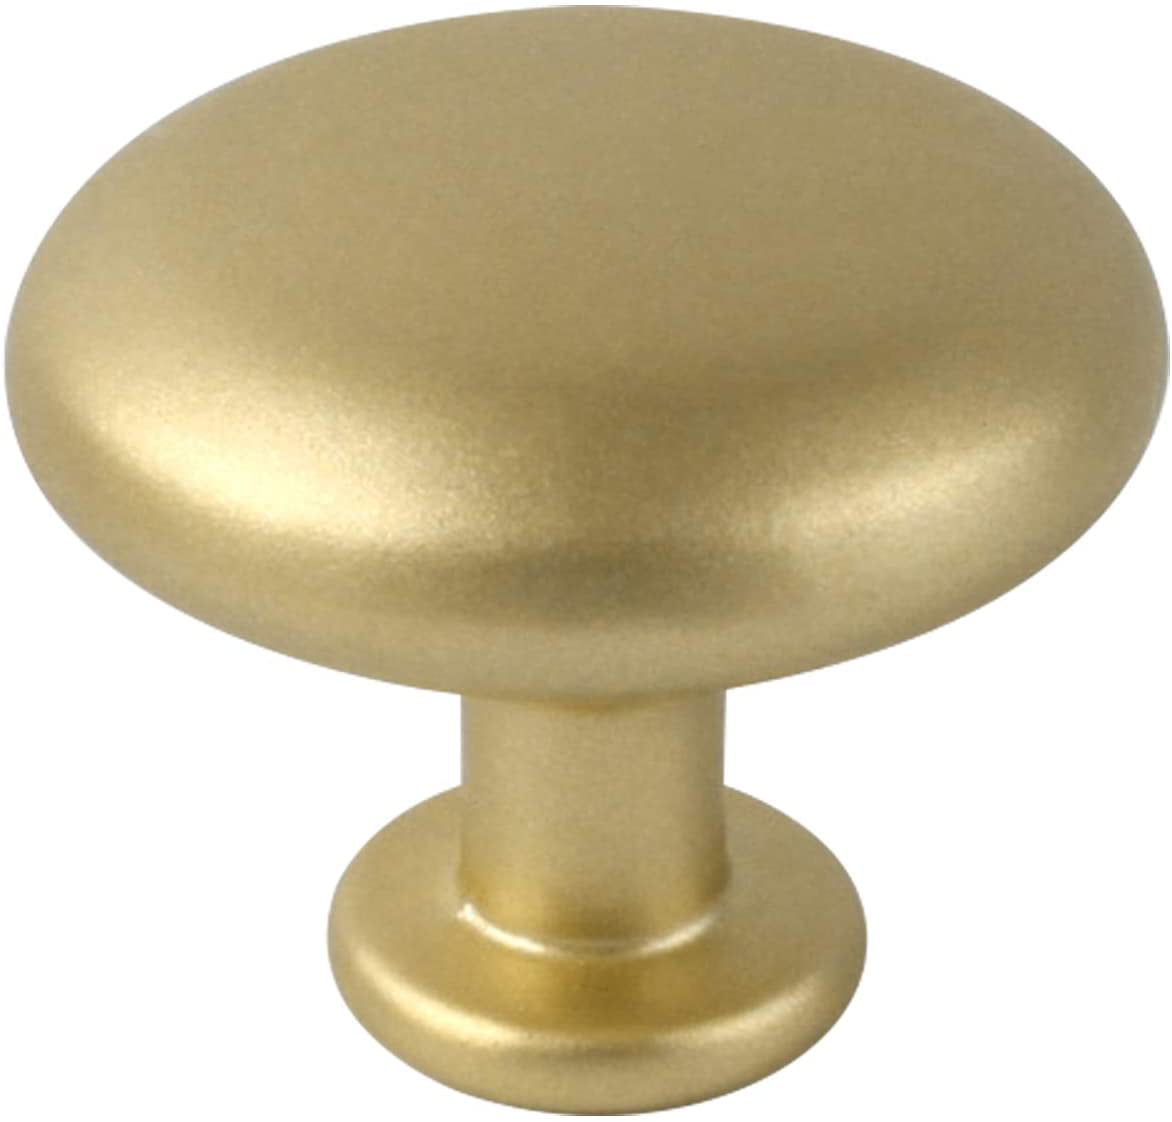 10 Small Solid Brass Knob for drawer/jewelry boxes.3/8 Inch Diameter. 10 knobs 